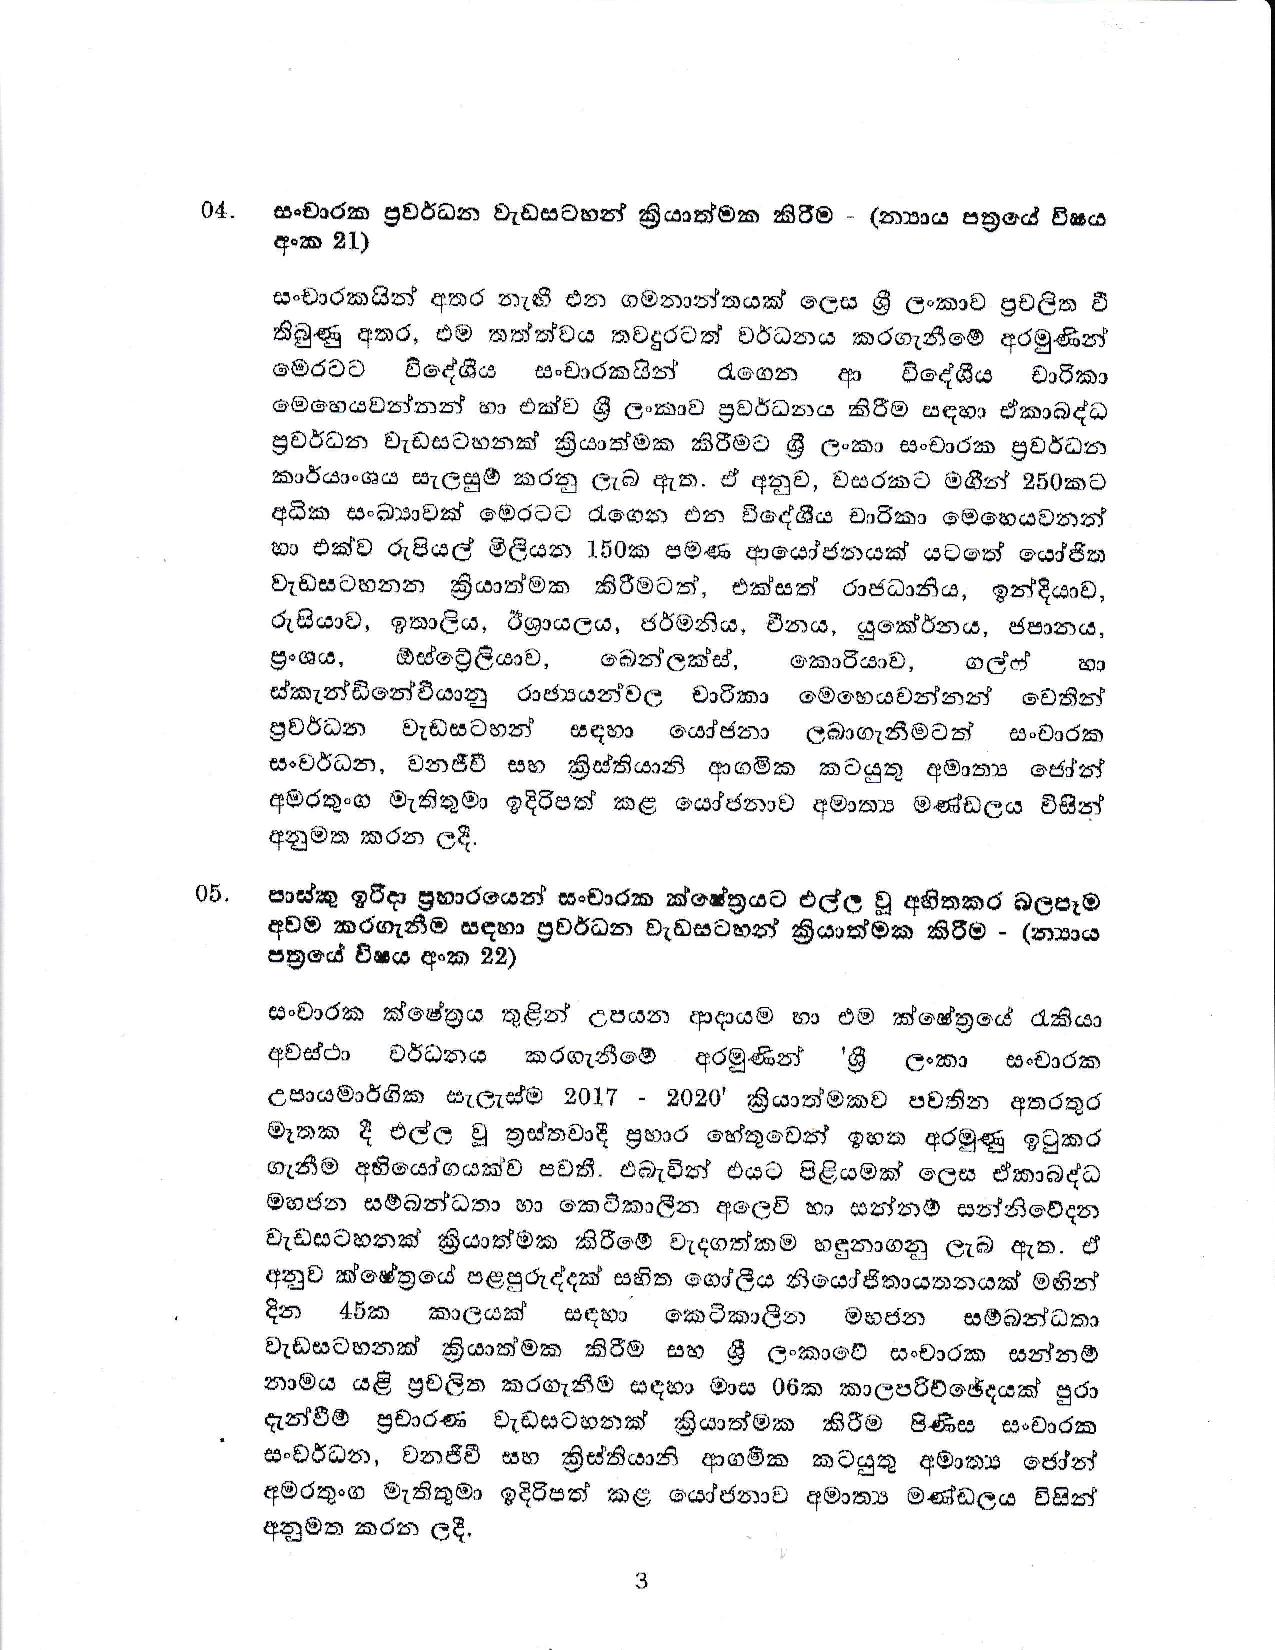 Cabinet Decision on 28.05.2019 page 003